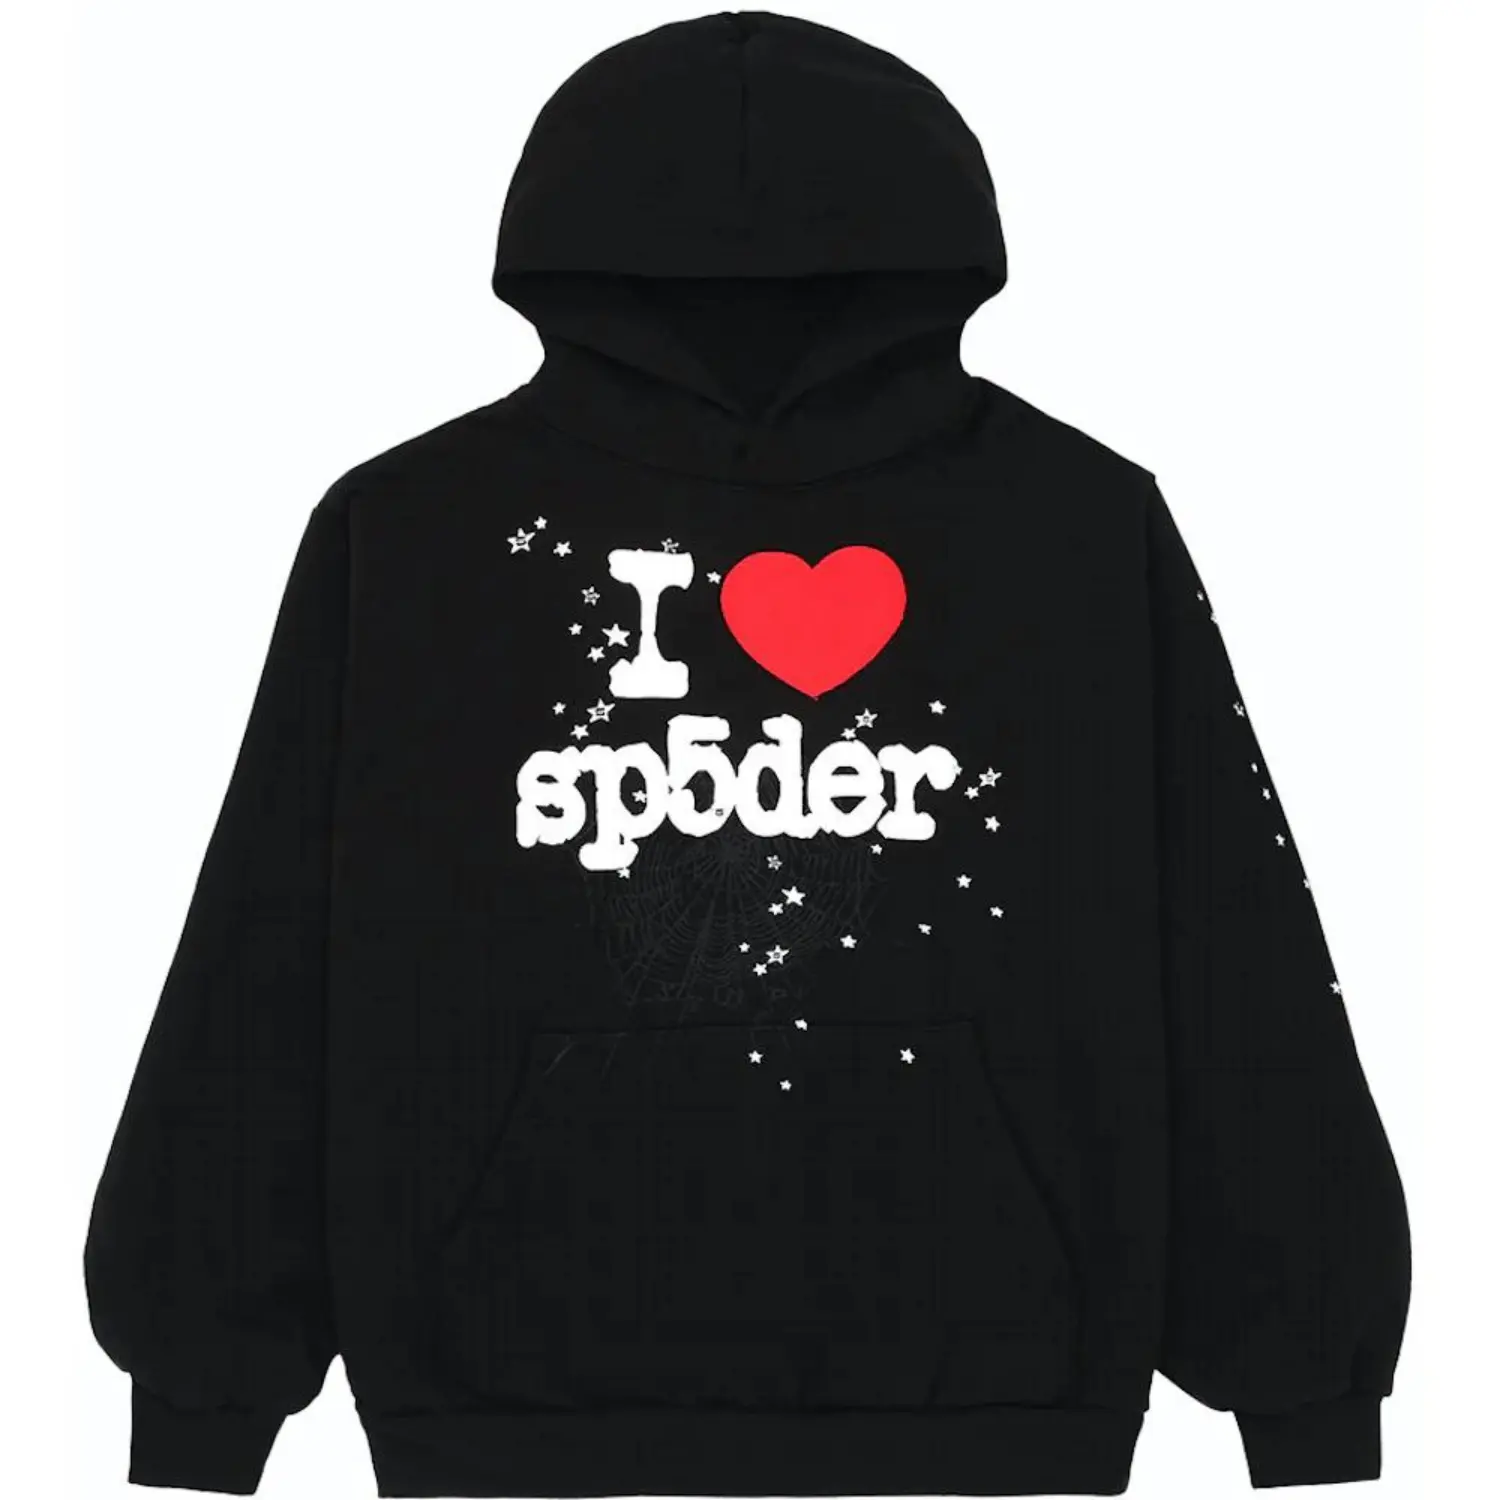 Spider Hoodies A Trendsetting Fashion Statement